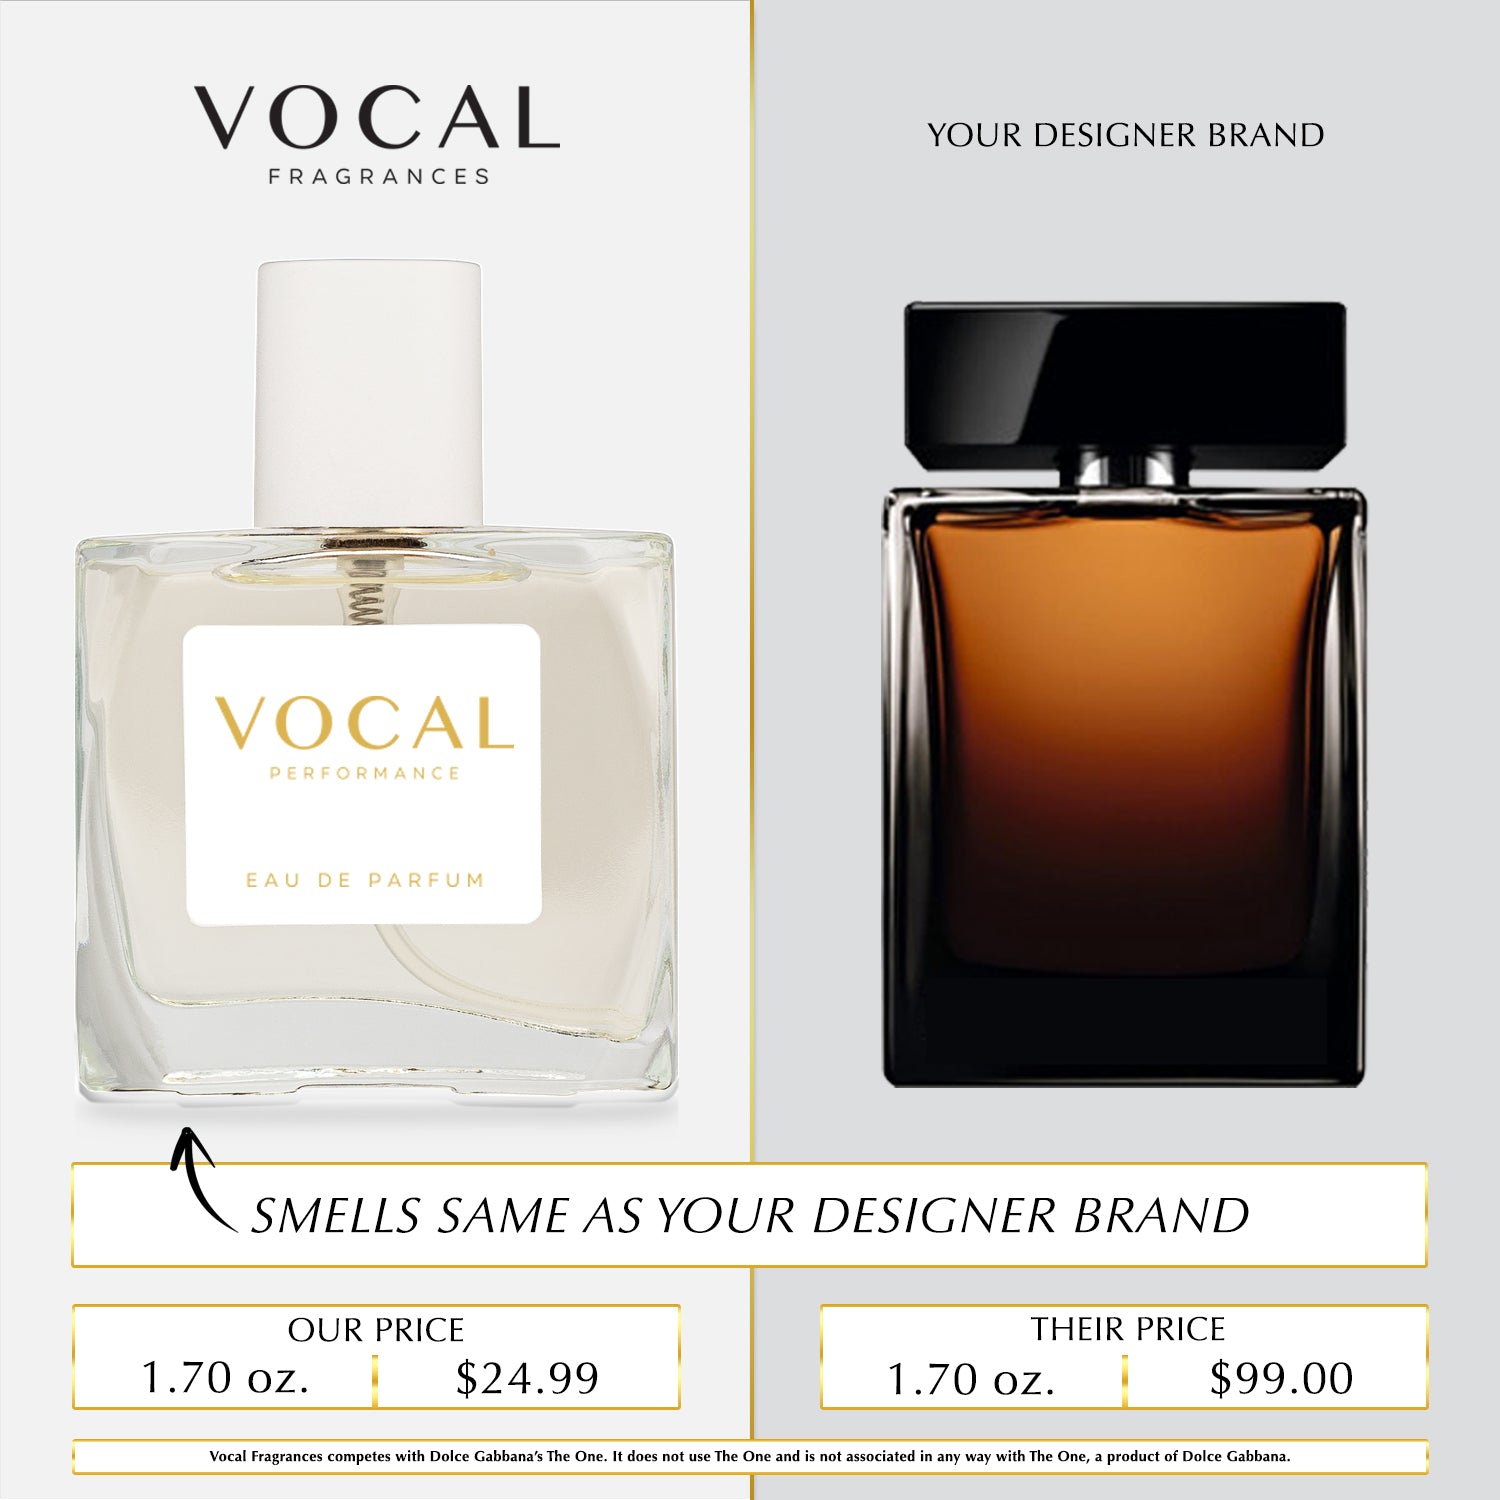 Accords – The Fragrance Foundation